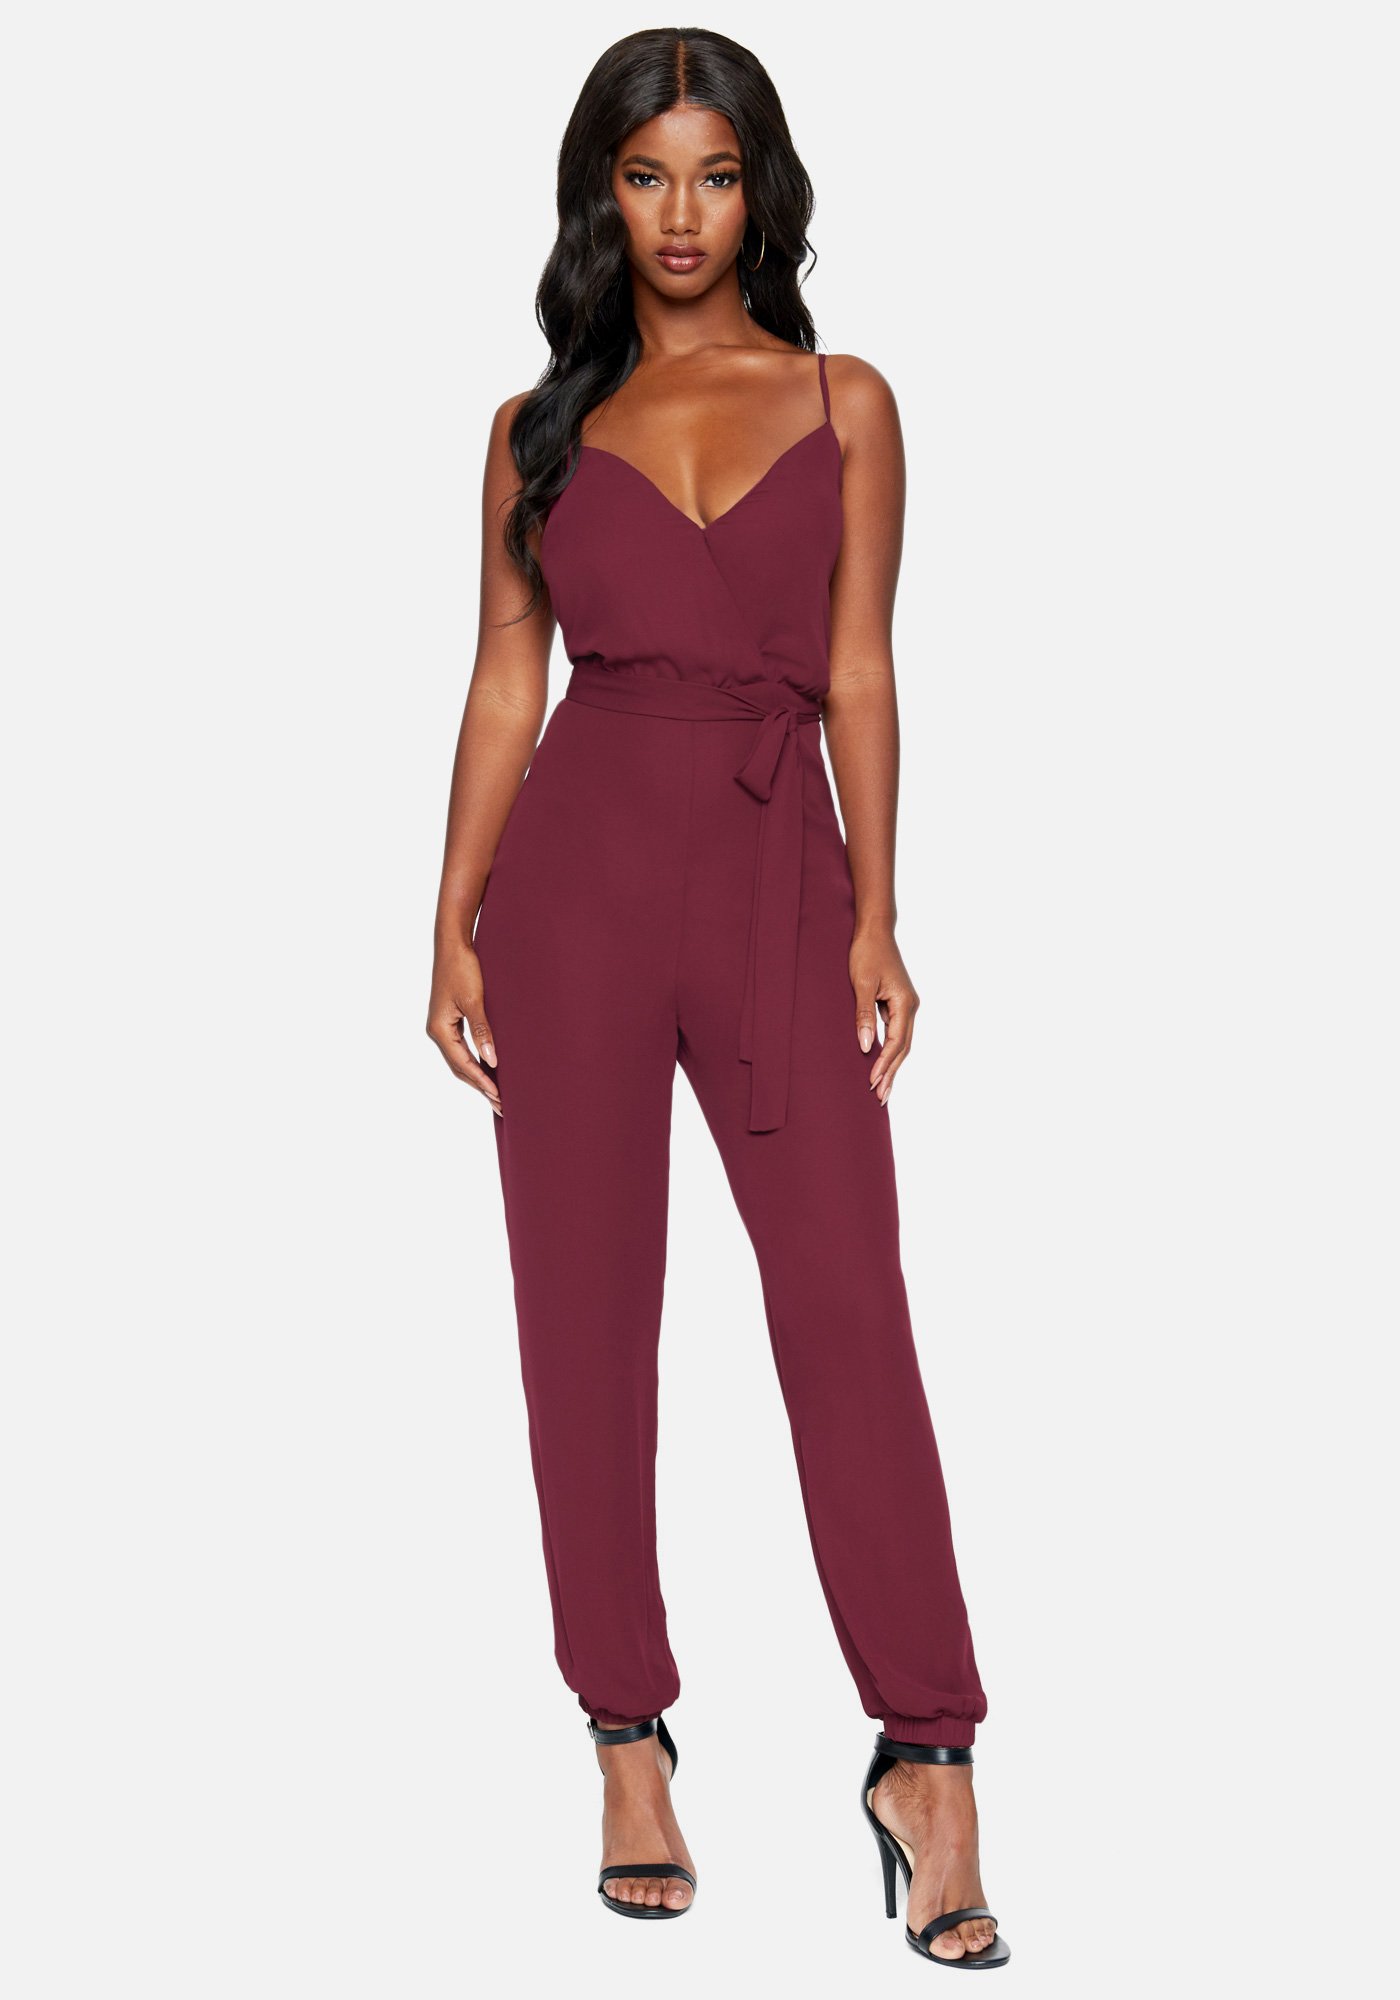 Bebe Women's Smocked Cuff Woven Jumpsuit, Size XXS in Rhododendron Polyester/Spandex